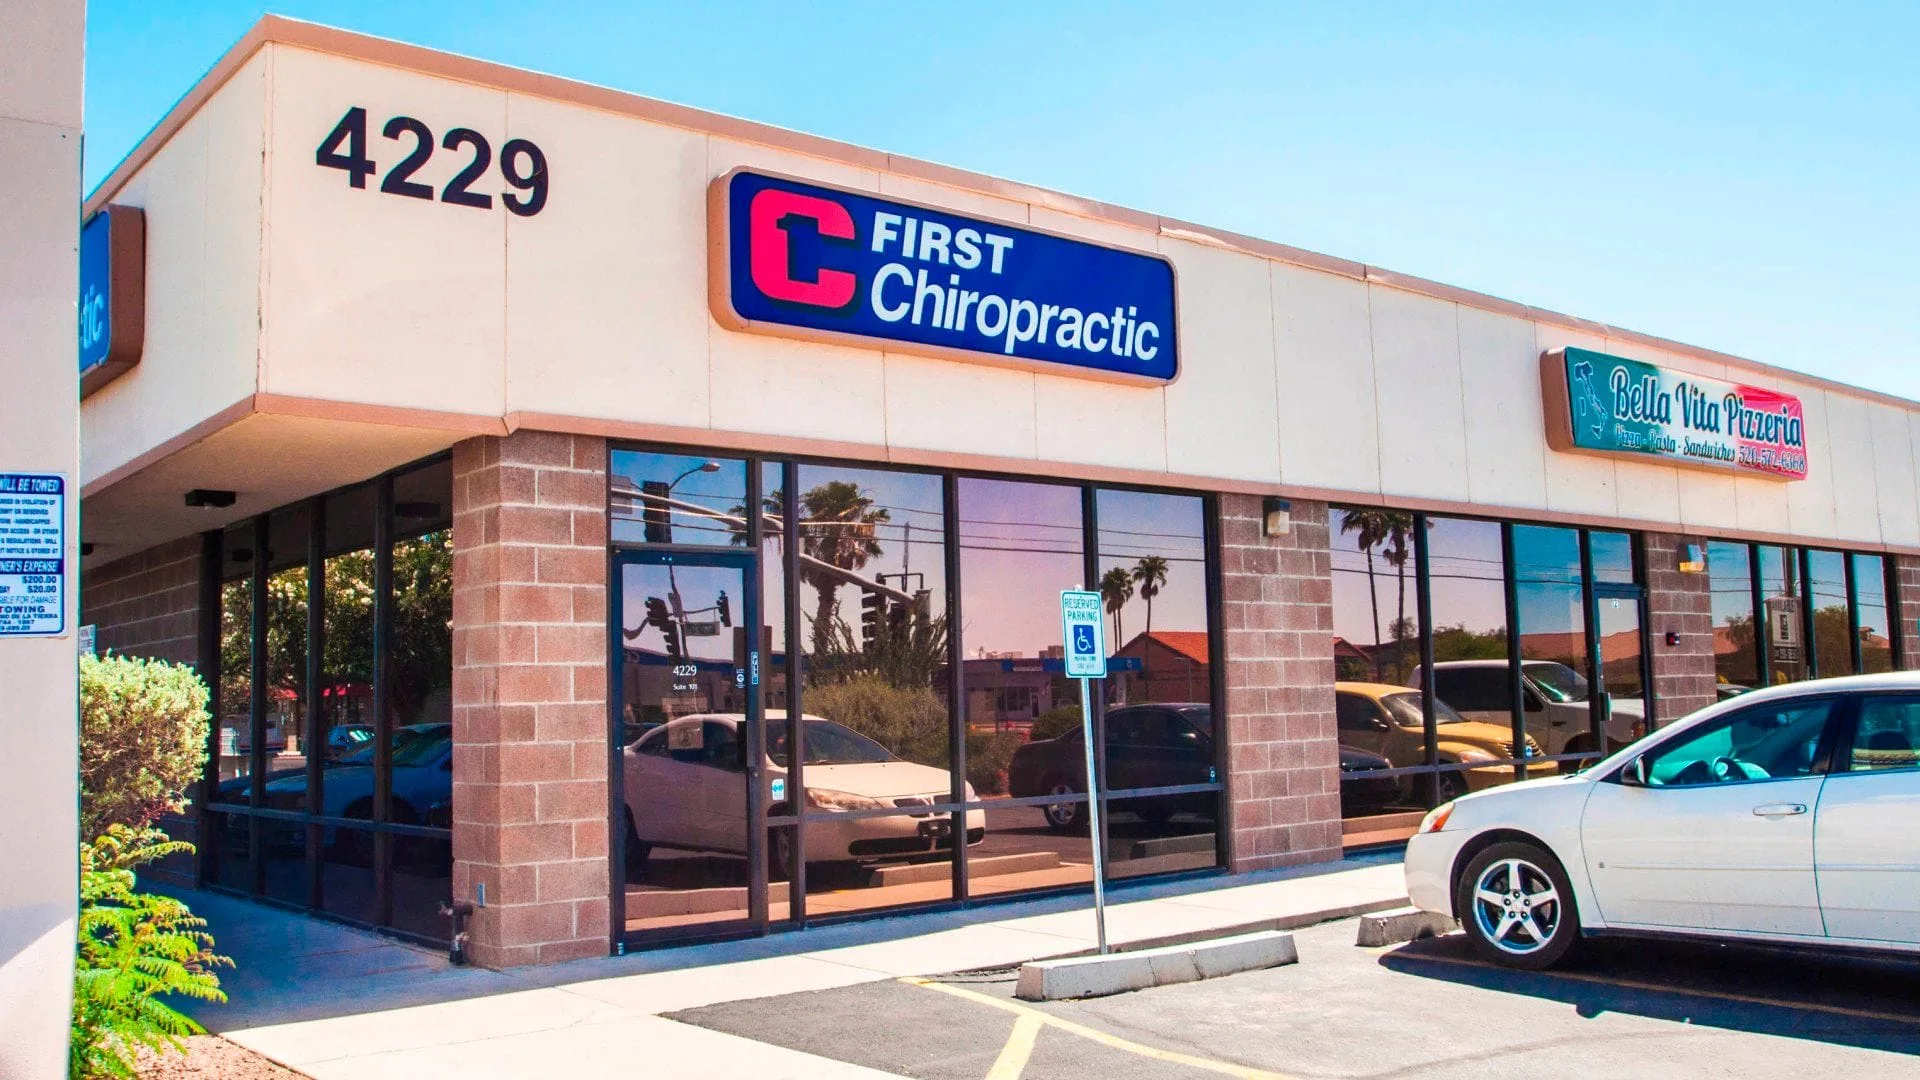 First Chiropractic of Tucson on Ina Road